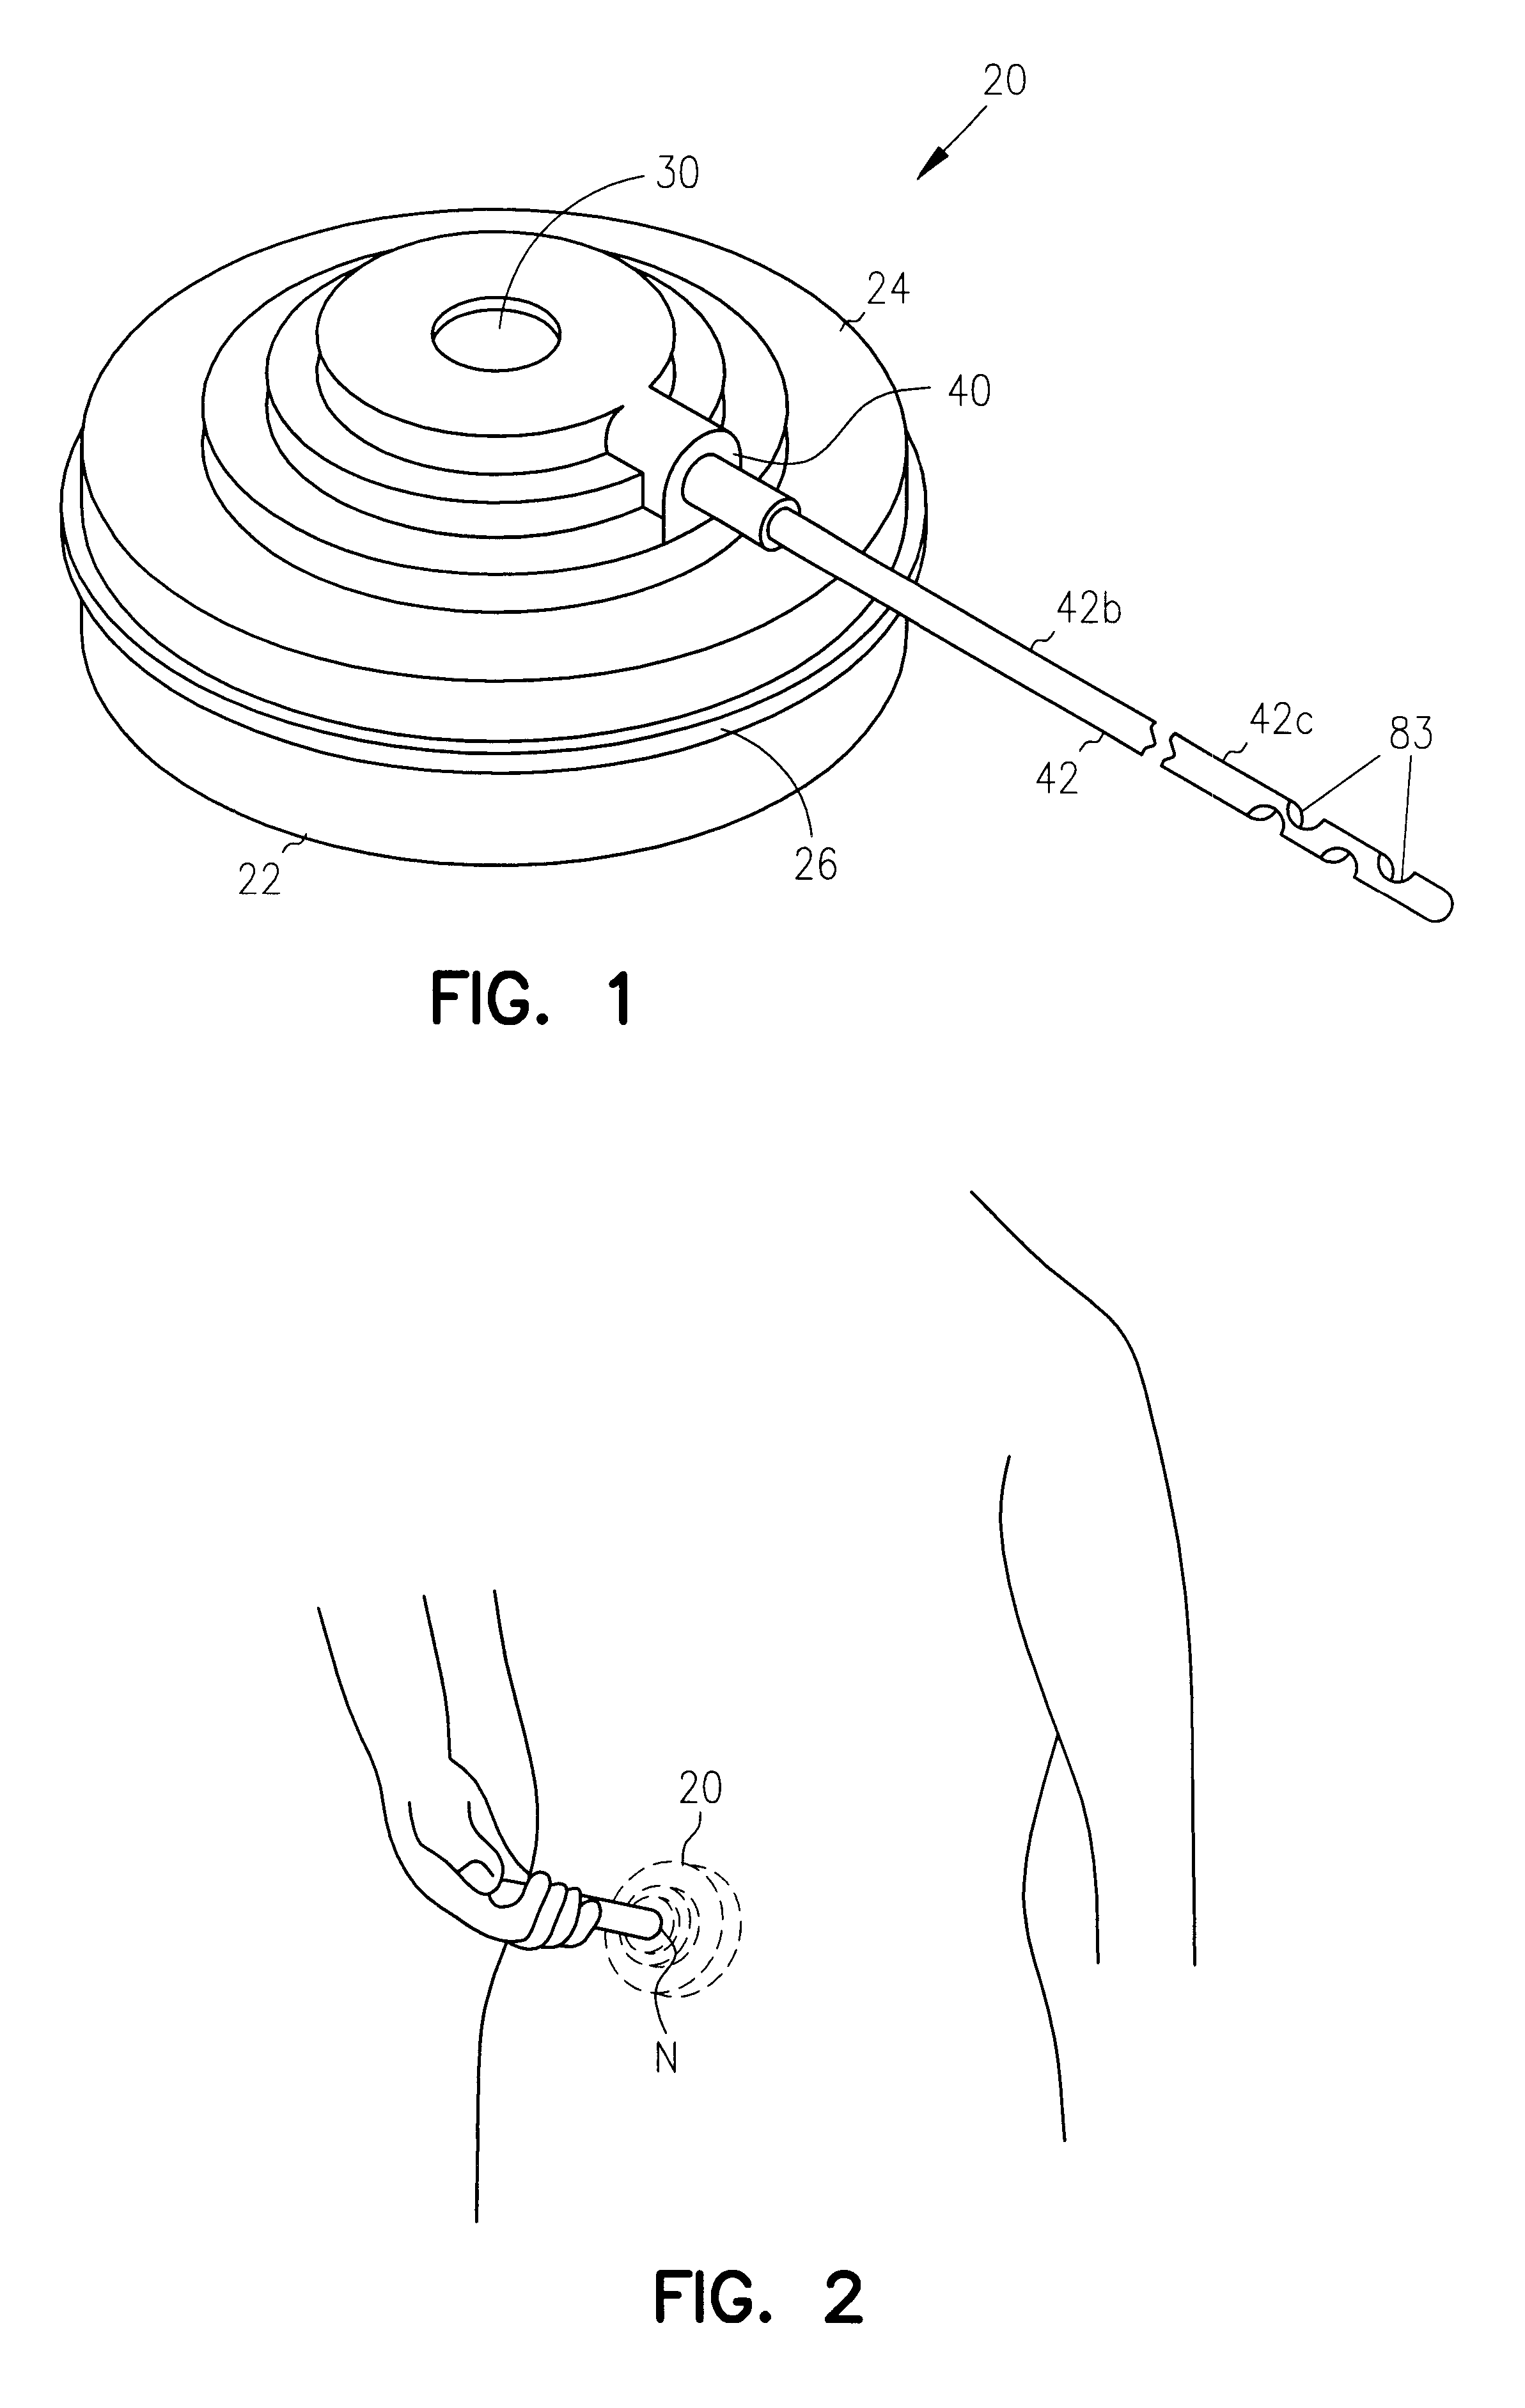 Fluid delivery device with heat activated energy source